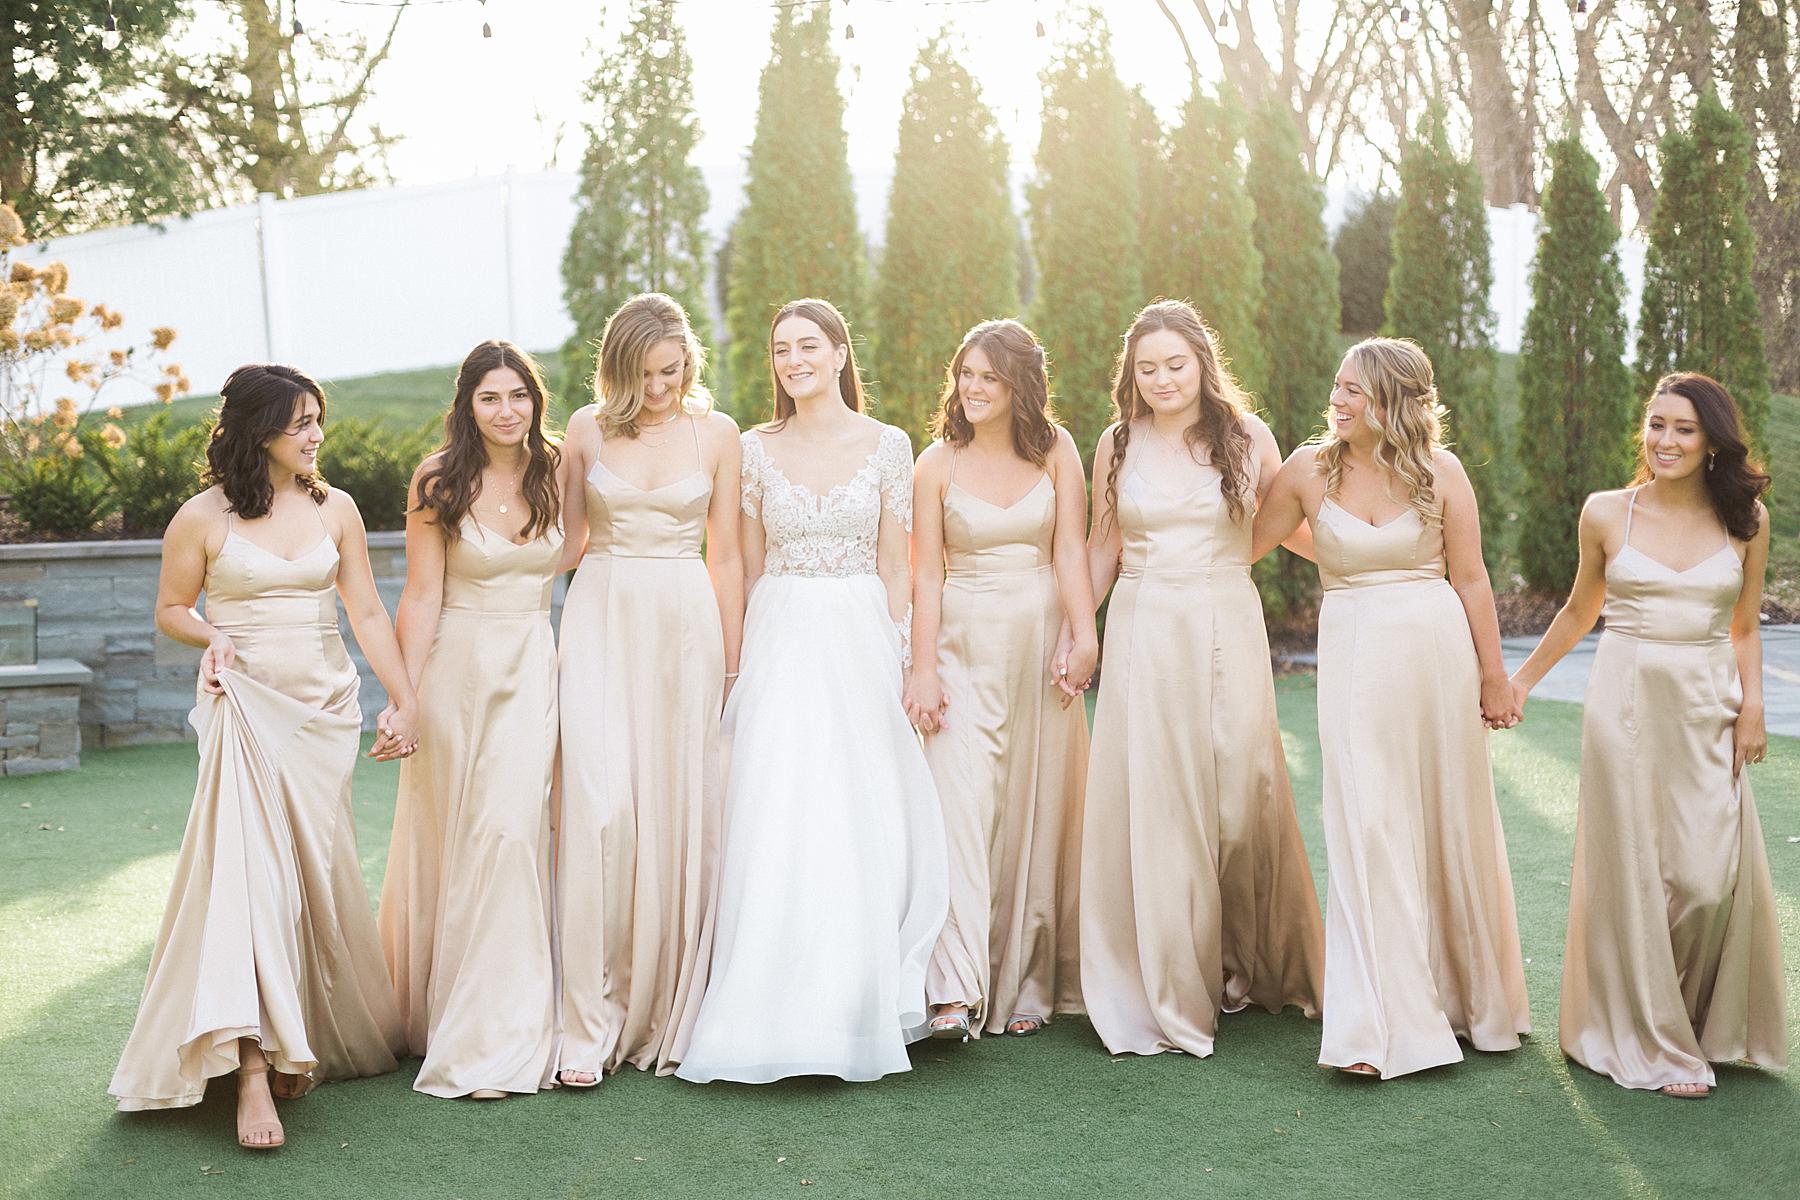 bride in white lace long sleeve gown walking with bridesmaids in nude champagne off-white dresses